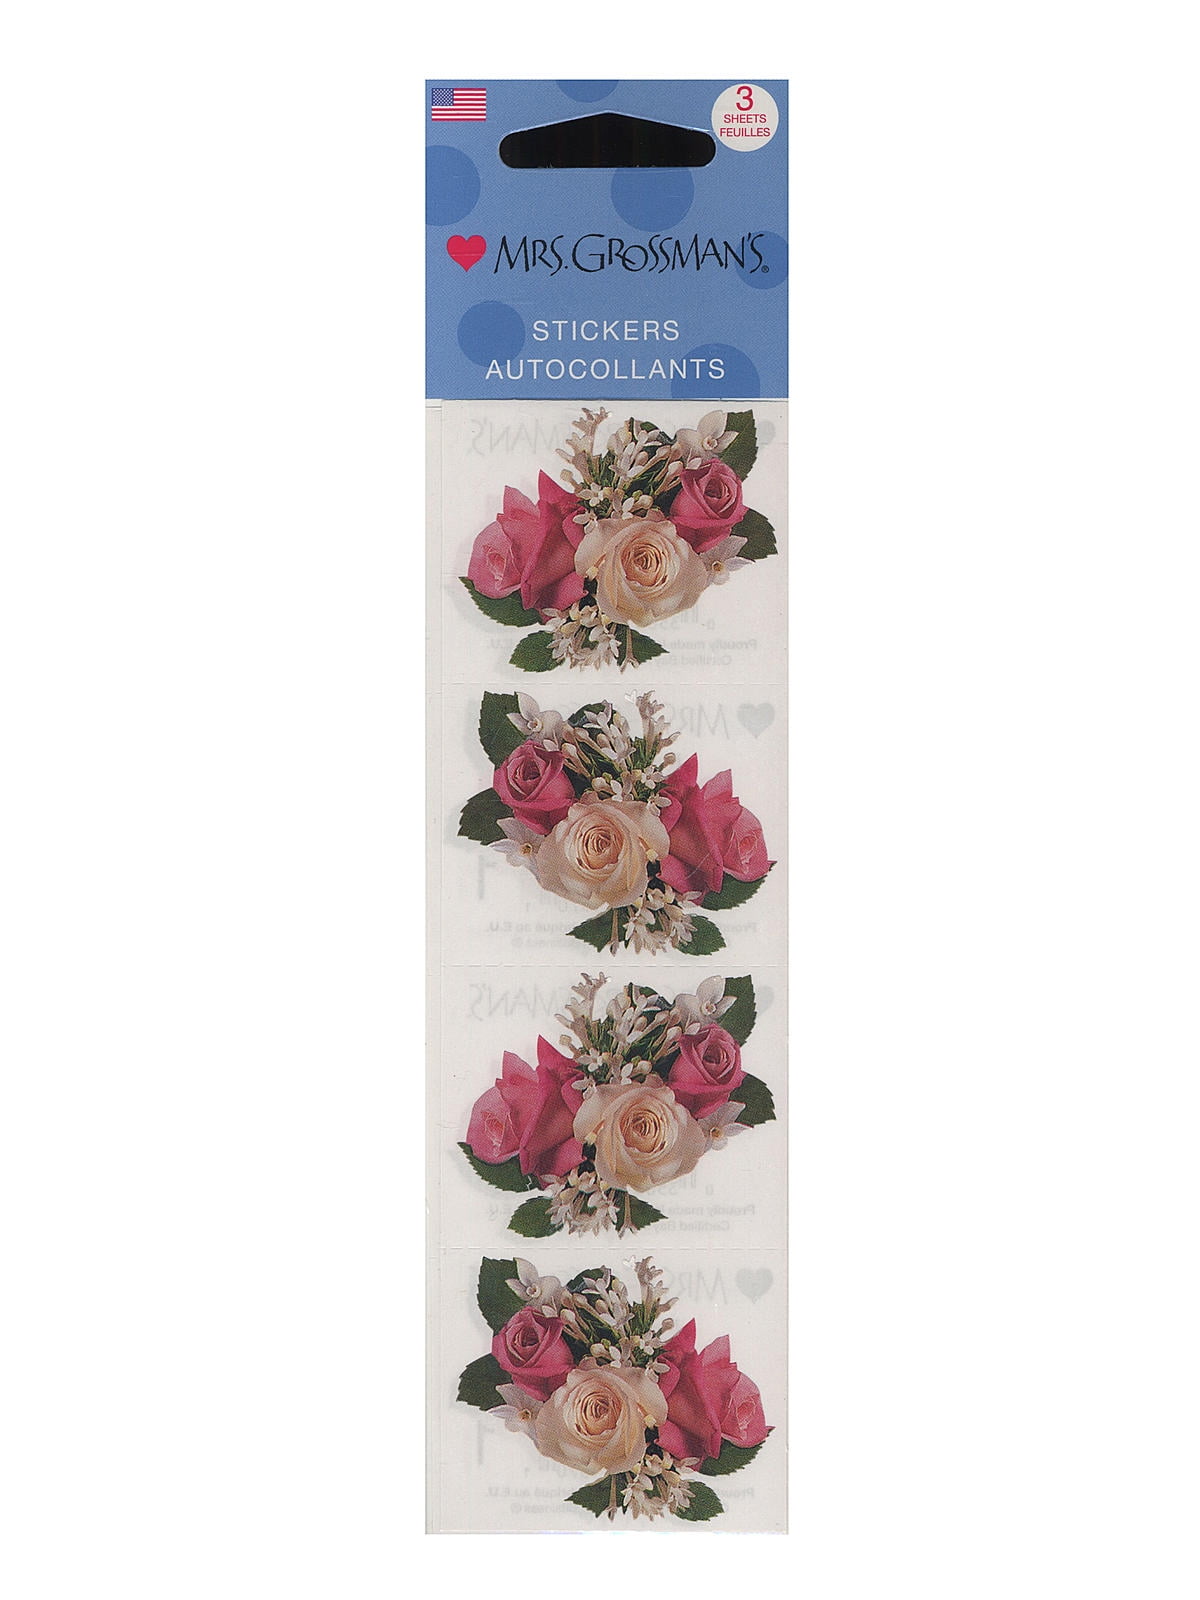 UP TO 20% OFF!!! Mrs Grossman's Sticker RED ROSES PHOTOESSENCE 